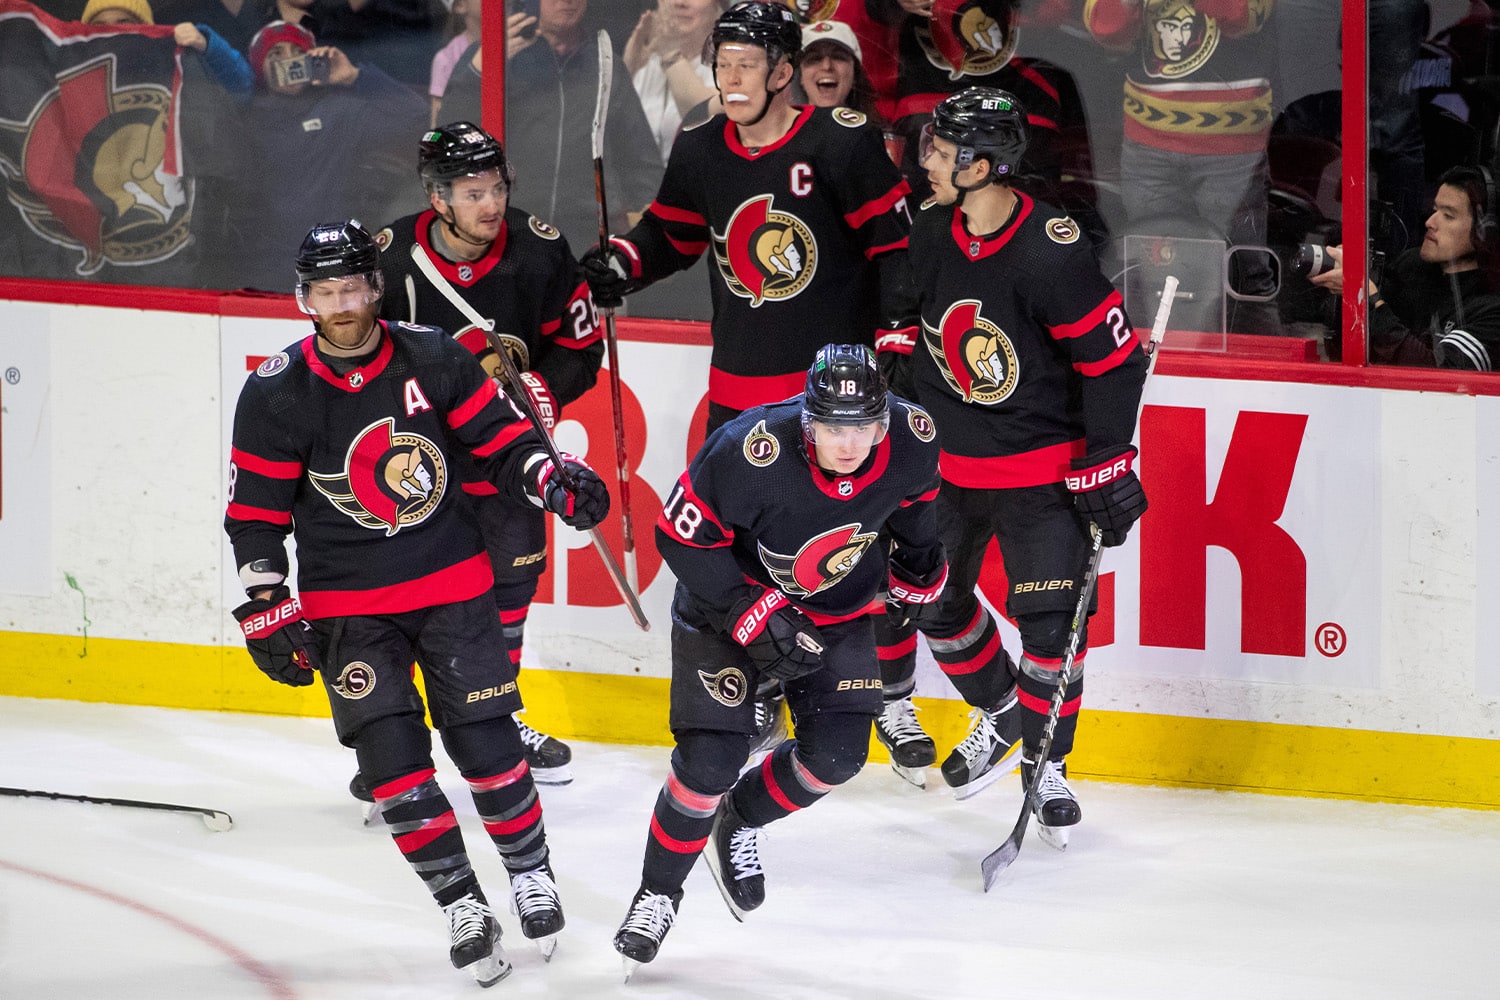 Ottawa Senators players together on the ice after scoring a goal.